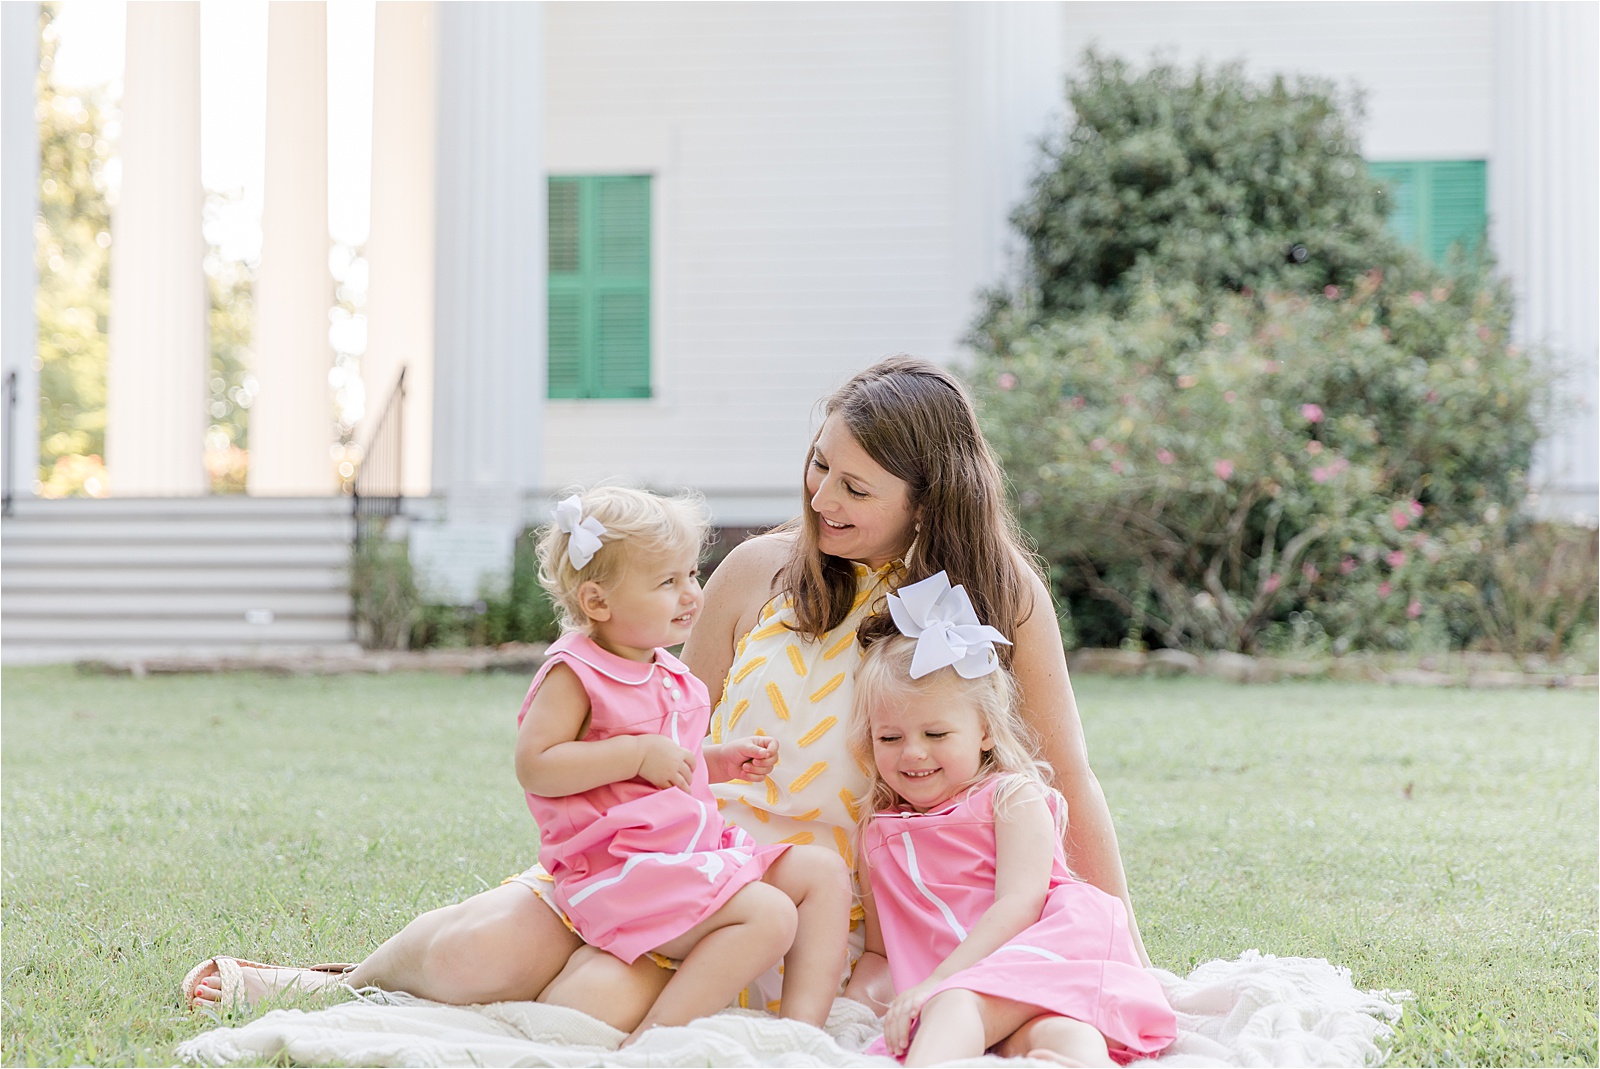 Mom and two young daughters in pink Beaufort Bonnet dresses